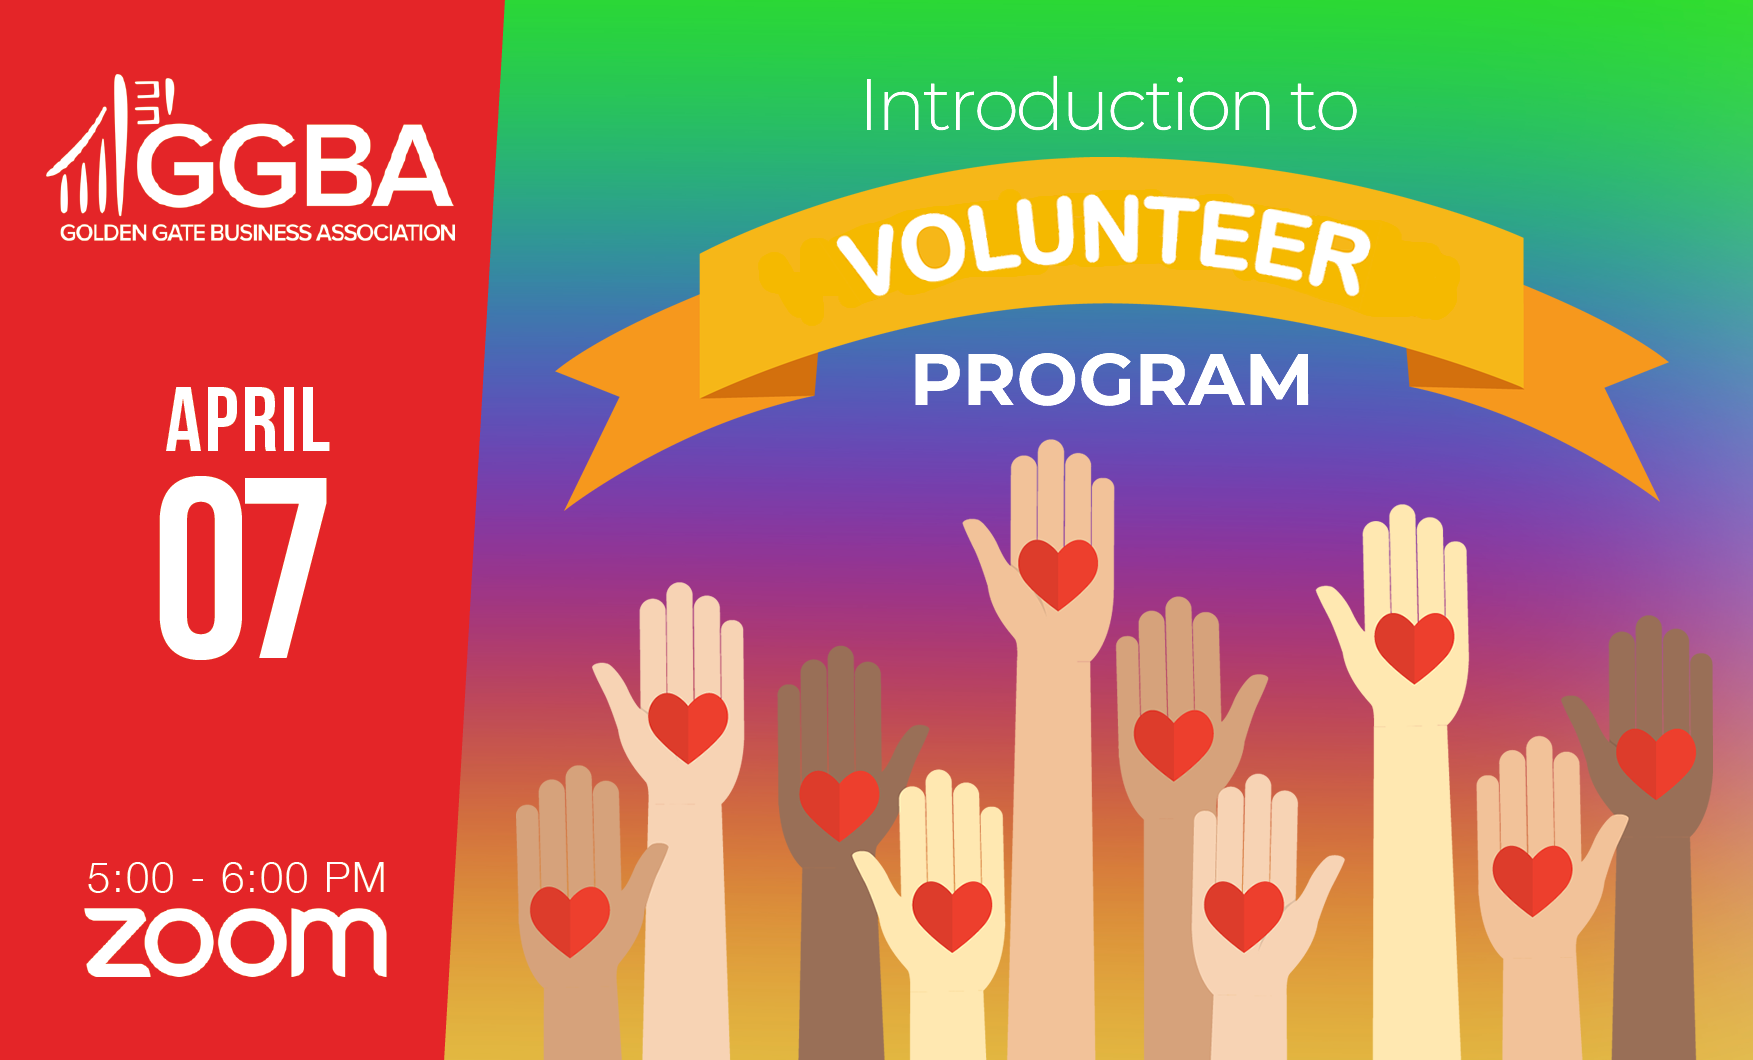 You are currently viewing Introduction to the GGBA Volunteer Program